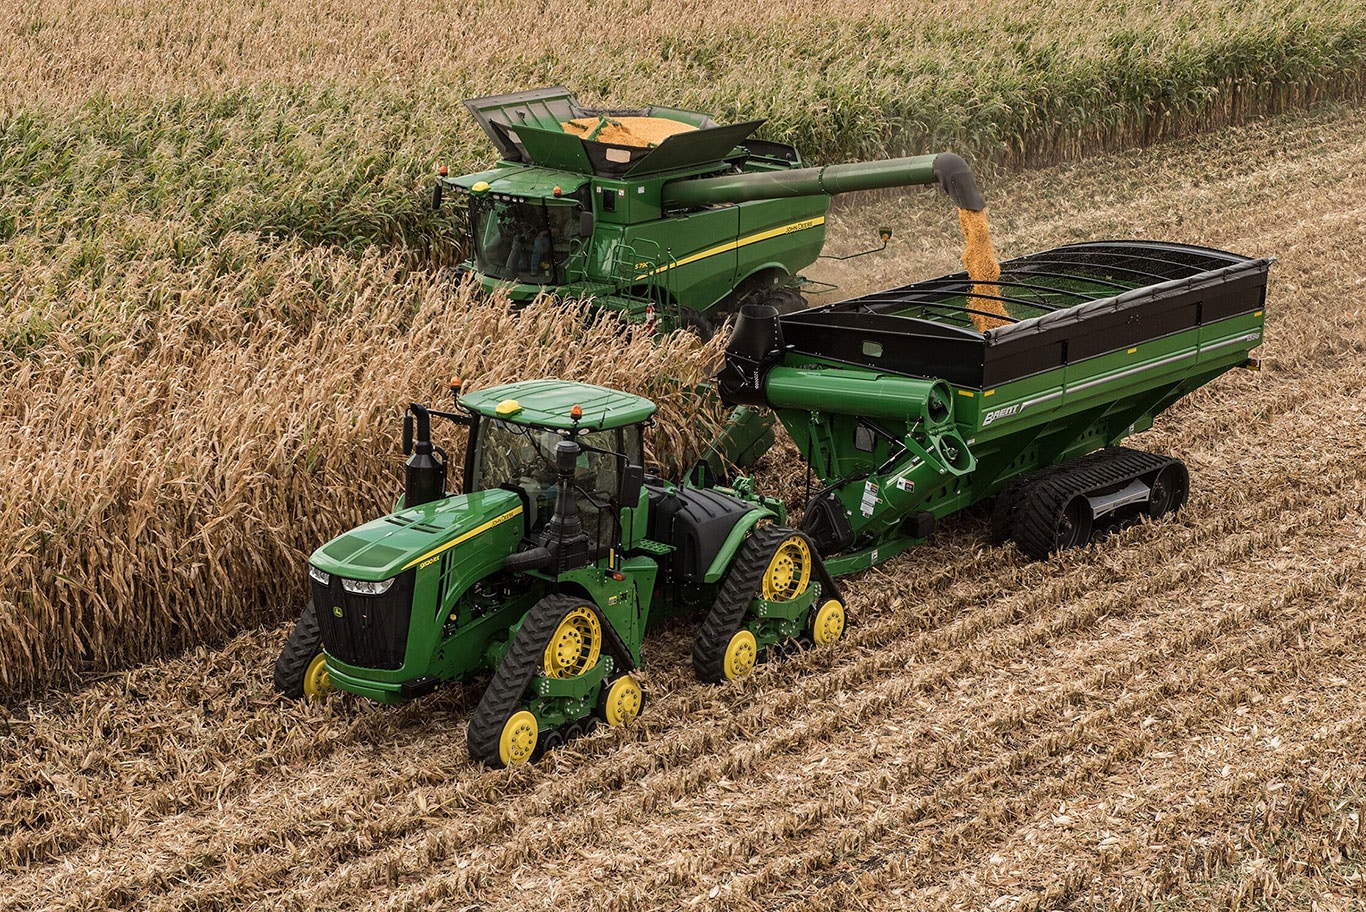 John Deere is expanding its Machine Sync feature